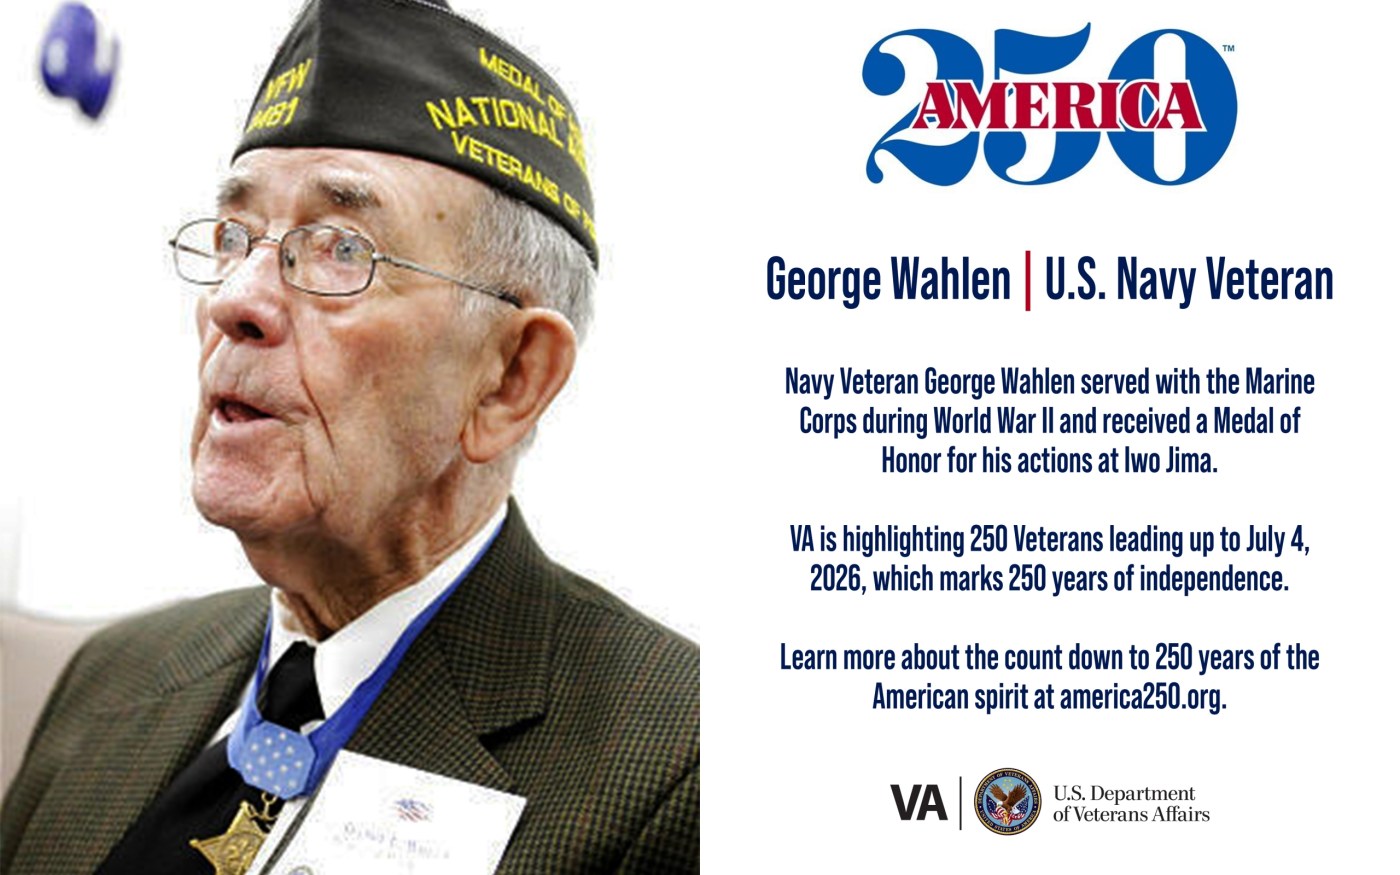 This week’s America250 salute is Navy Veteran George Wahlen who served received a Medal of Honor for his actions at Iwo Jima in World War II.